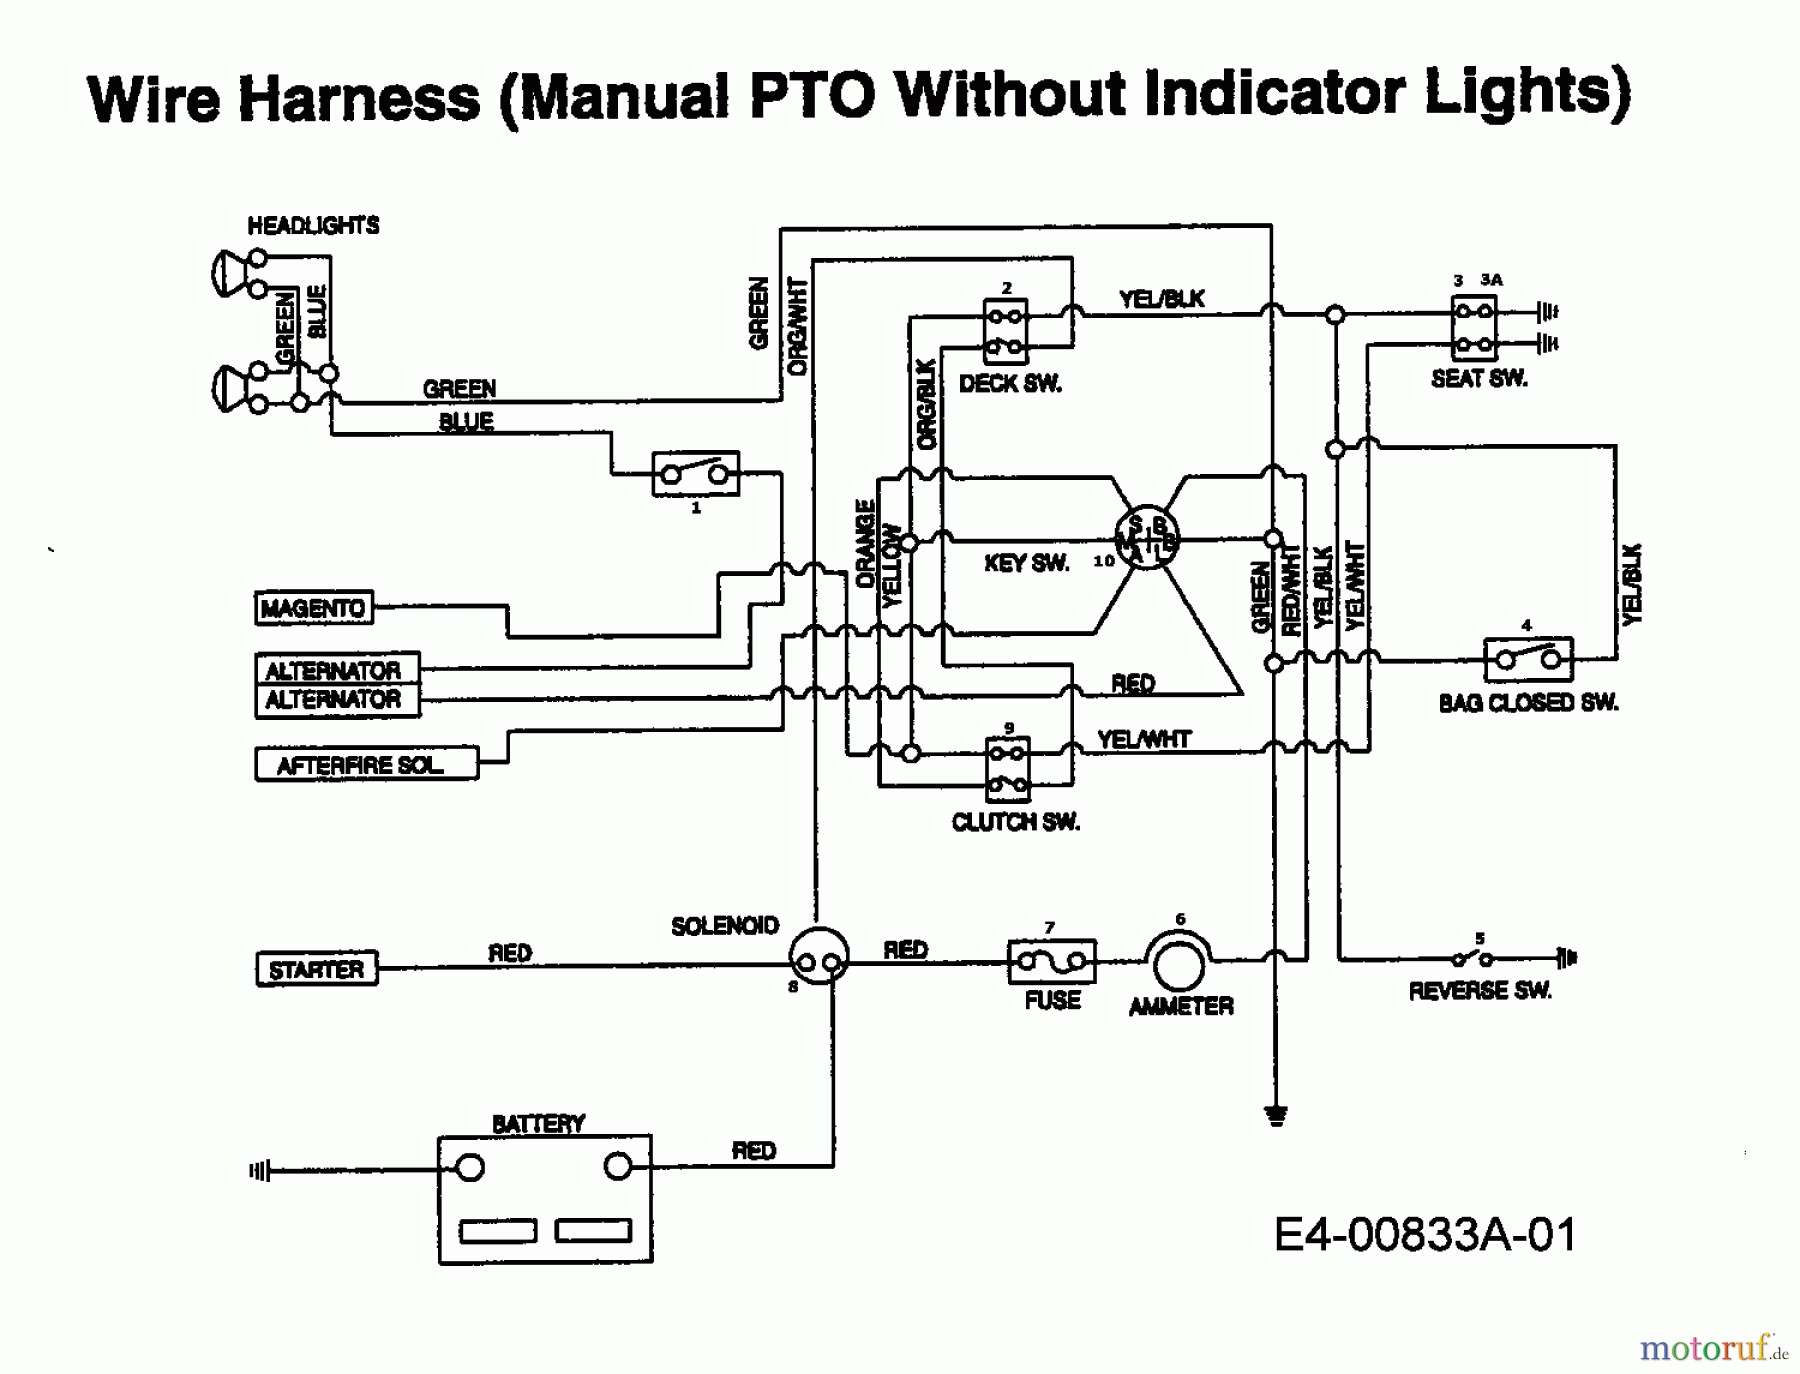  Univert Lawn tractors UN 145 BNH 13AP794N663  (1998) Wiring diagram without indicator lights